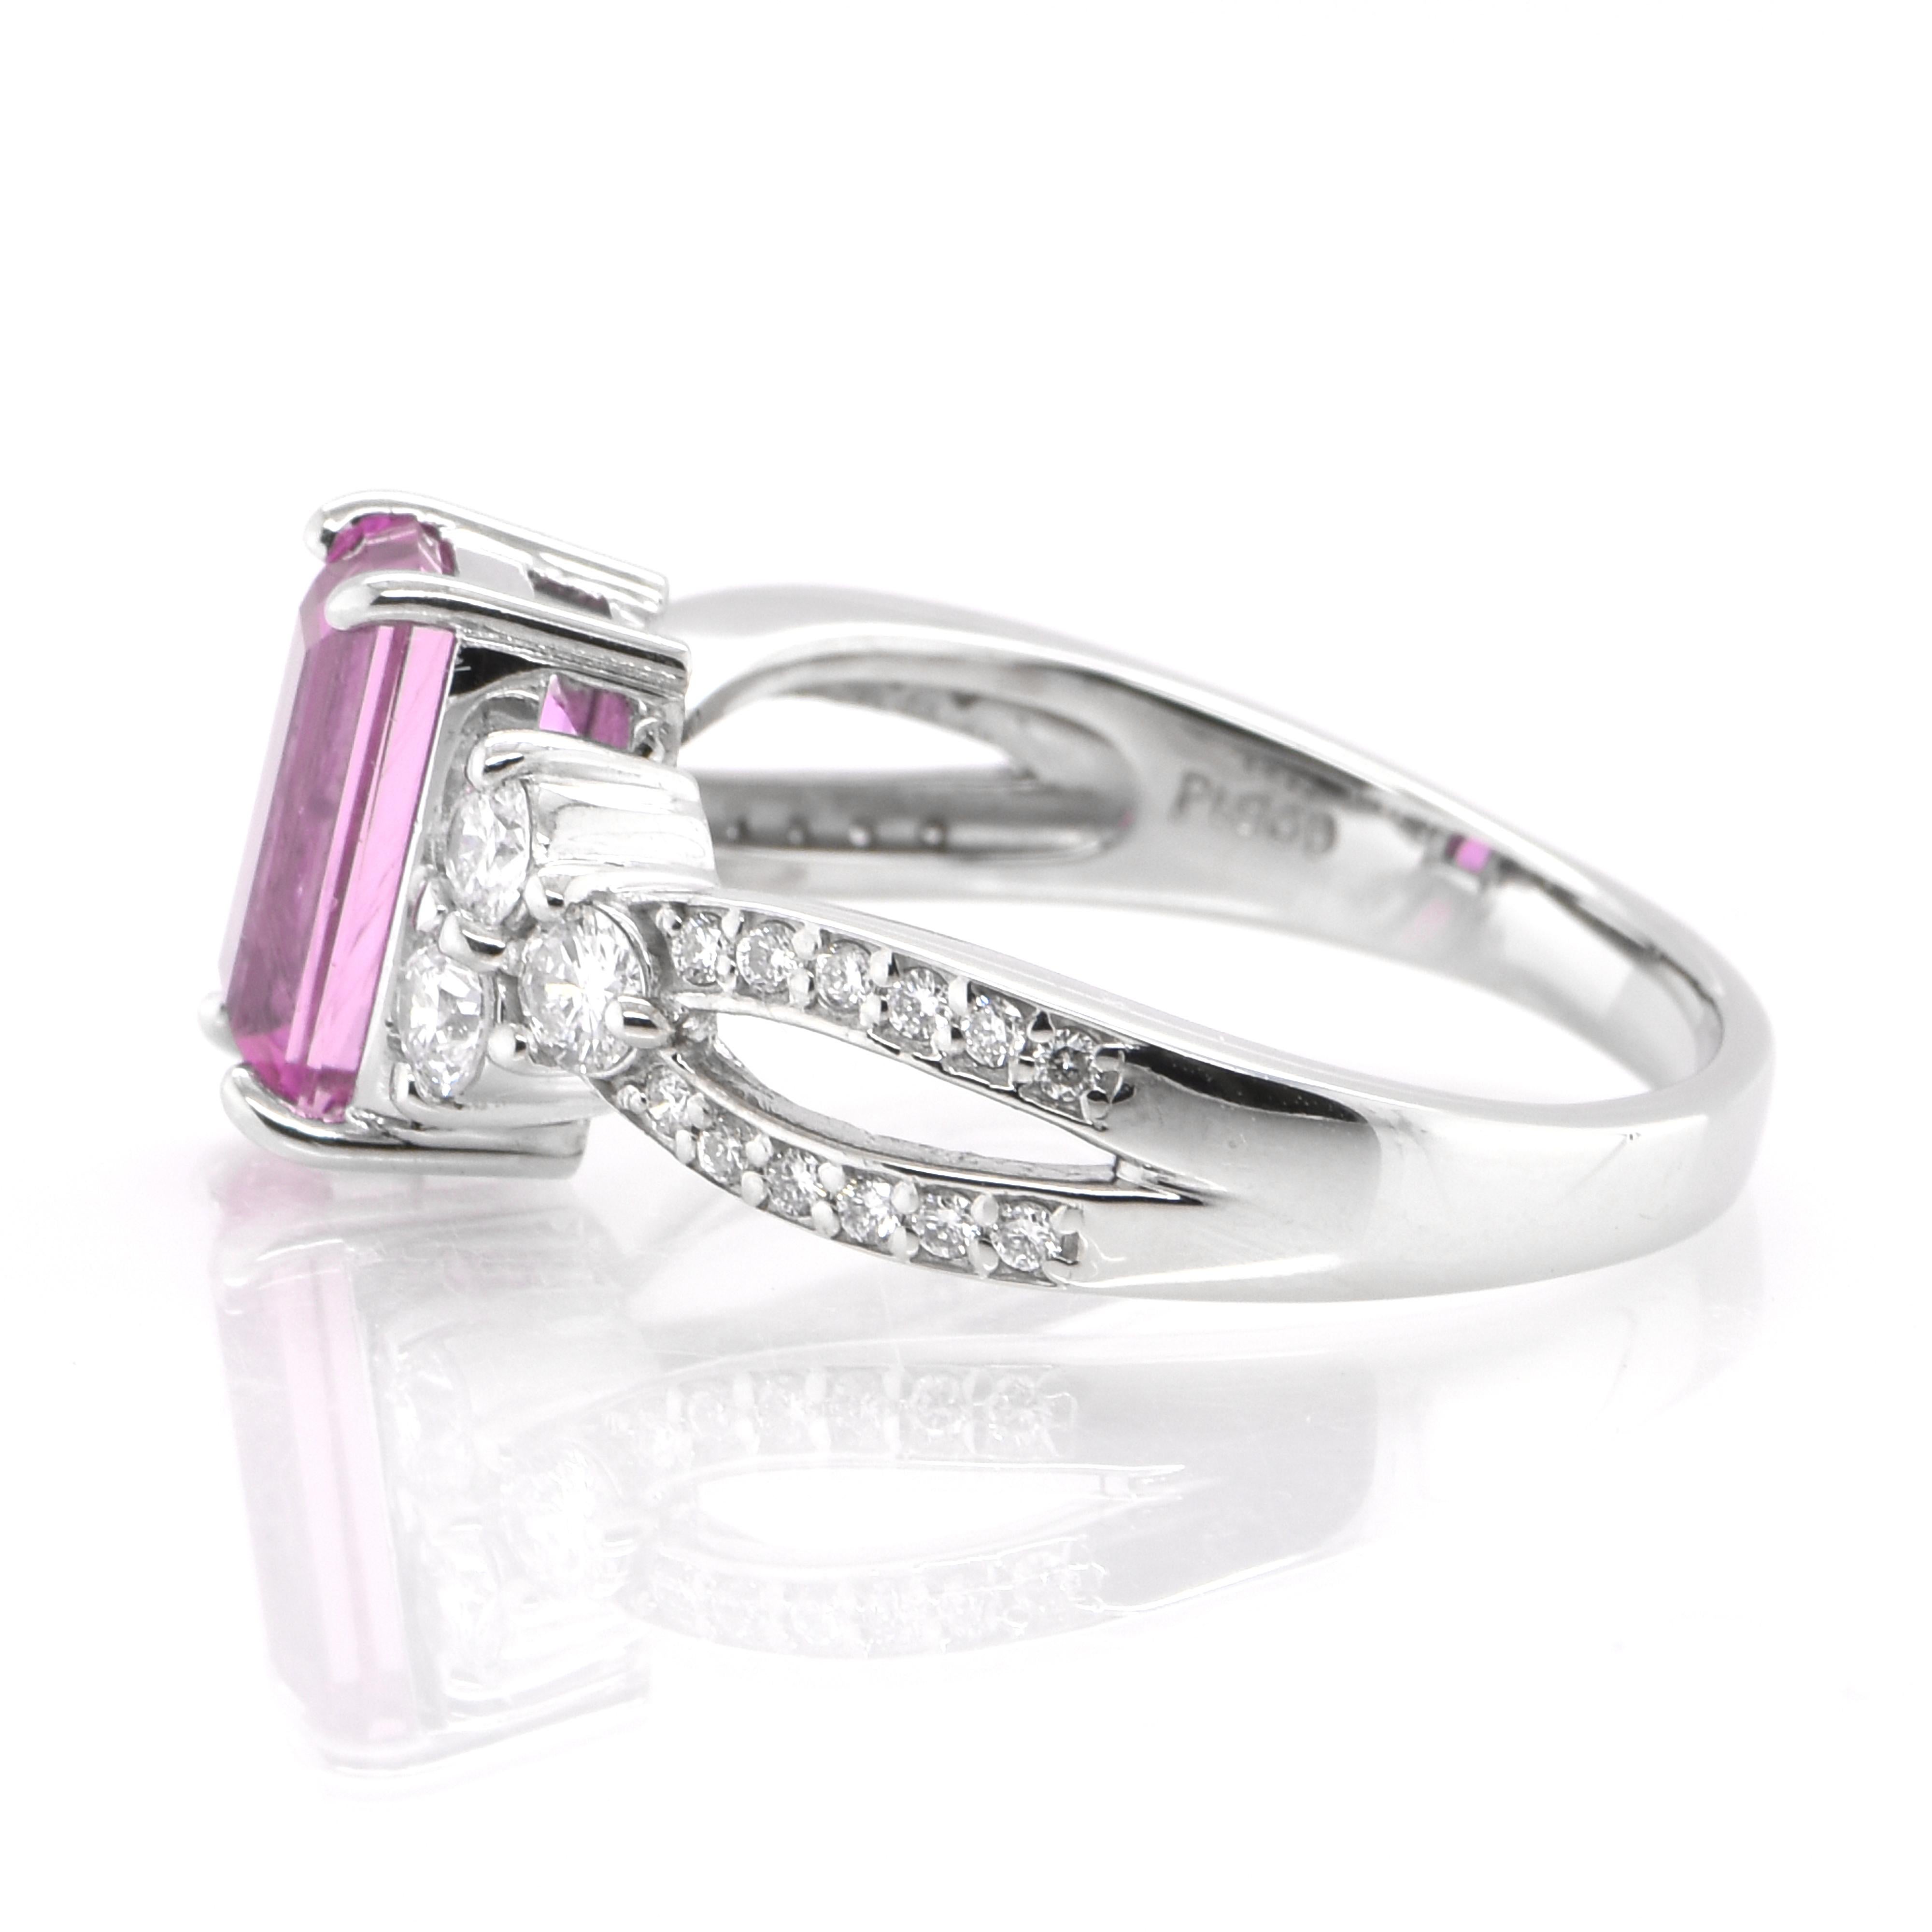 Octagon Cut GIA Certified 2.56 Carat Natural Pink Sapphire and Diamond Ring Set in Platinum